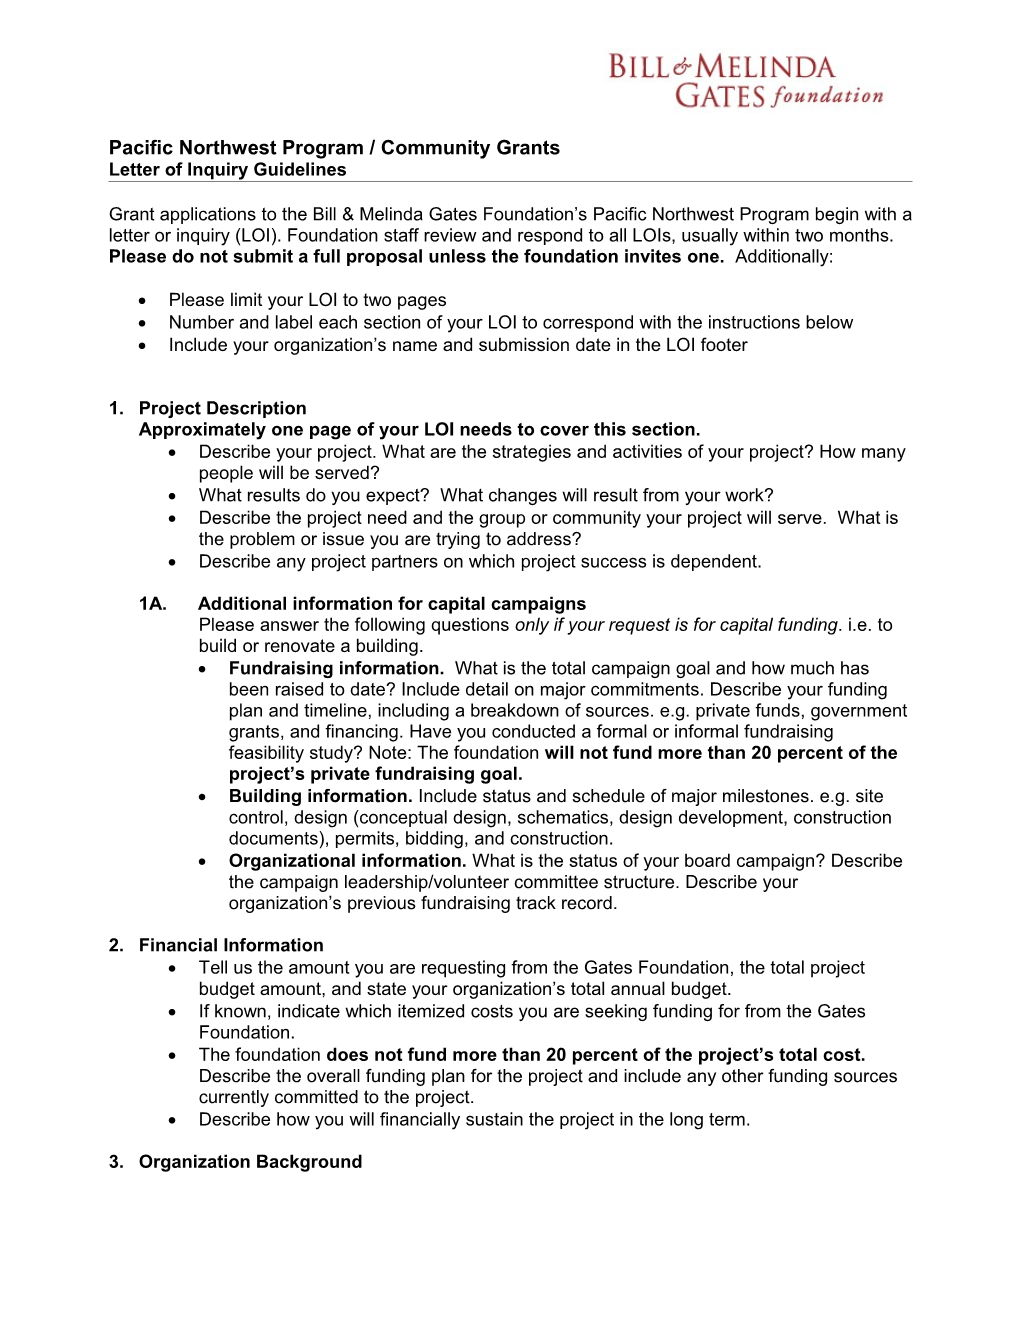 Pacific Northwest Letter of Inquiry Guidelines